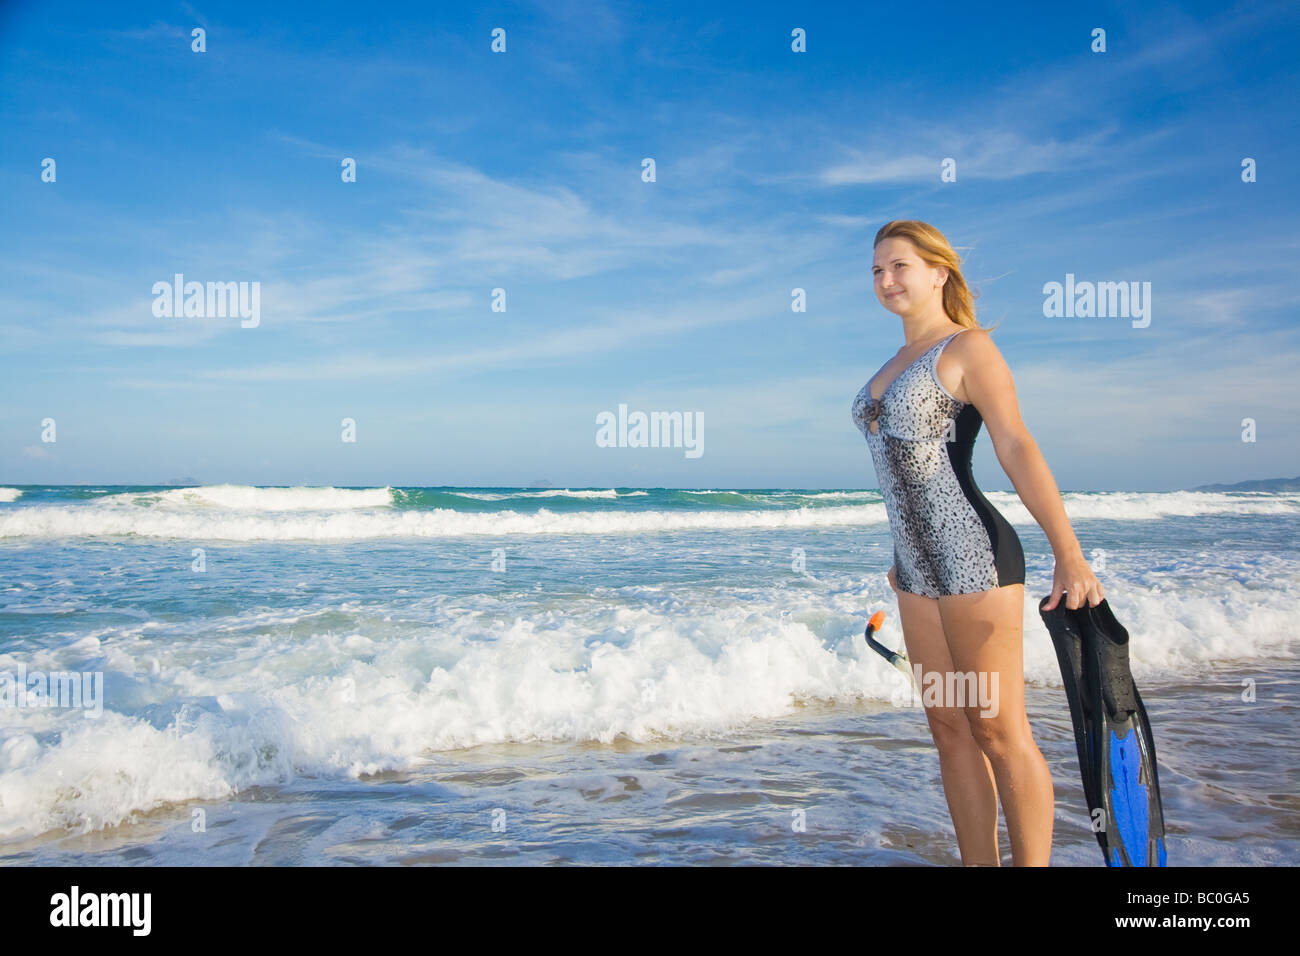 Young woman with snorkeling equipment near ocean Stock Photo